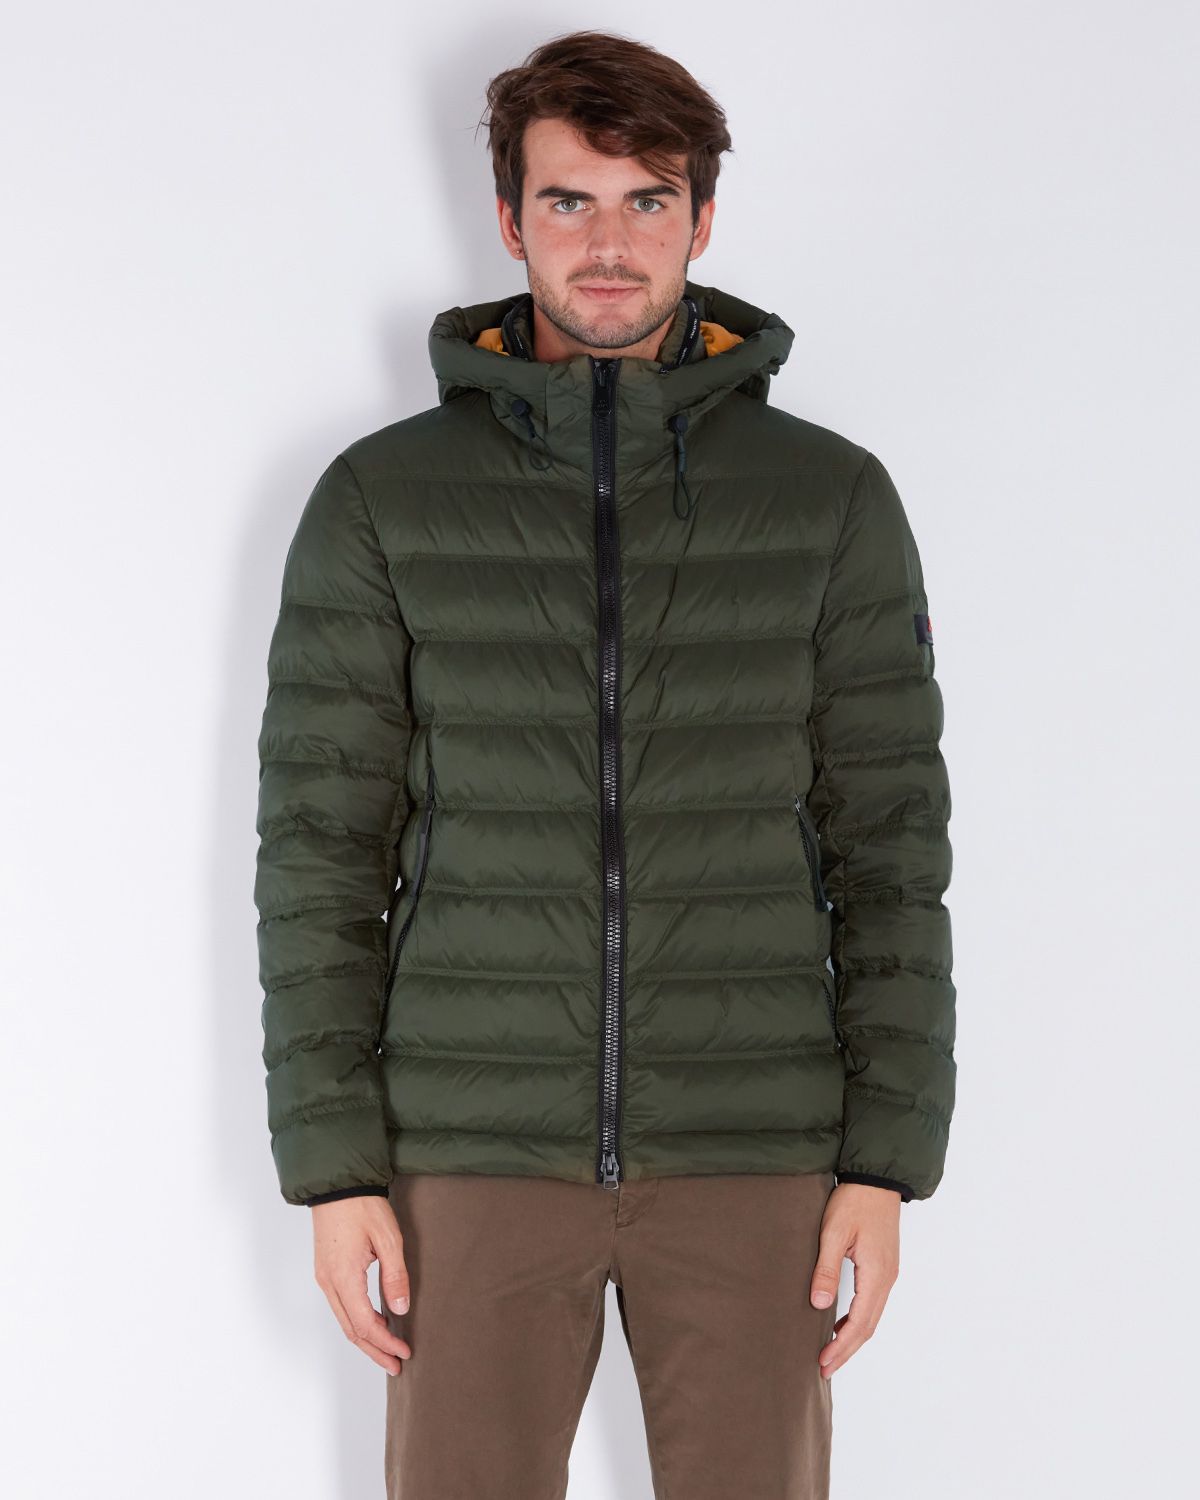 Boggs Kn Hooded Down Jacket